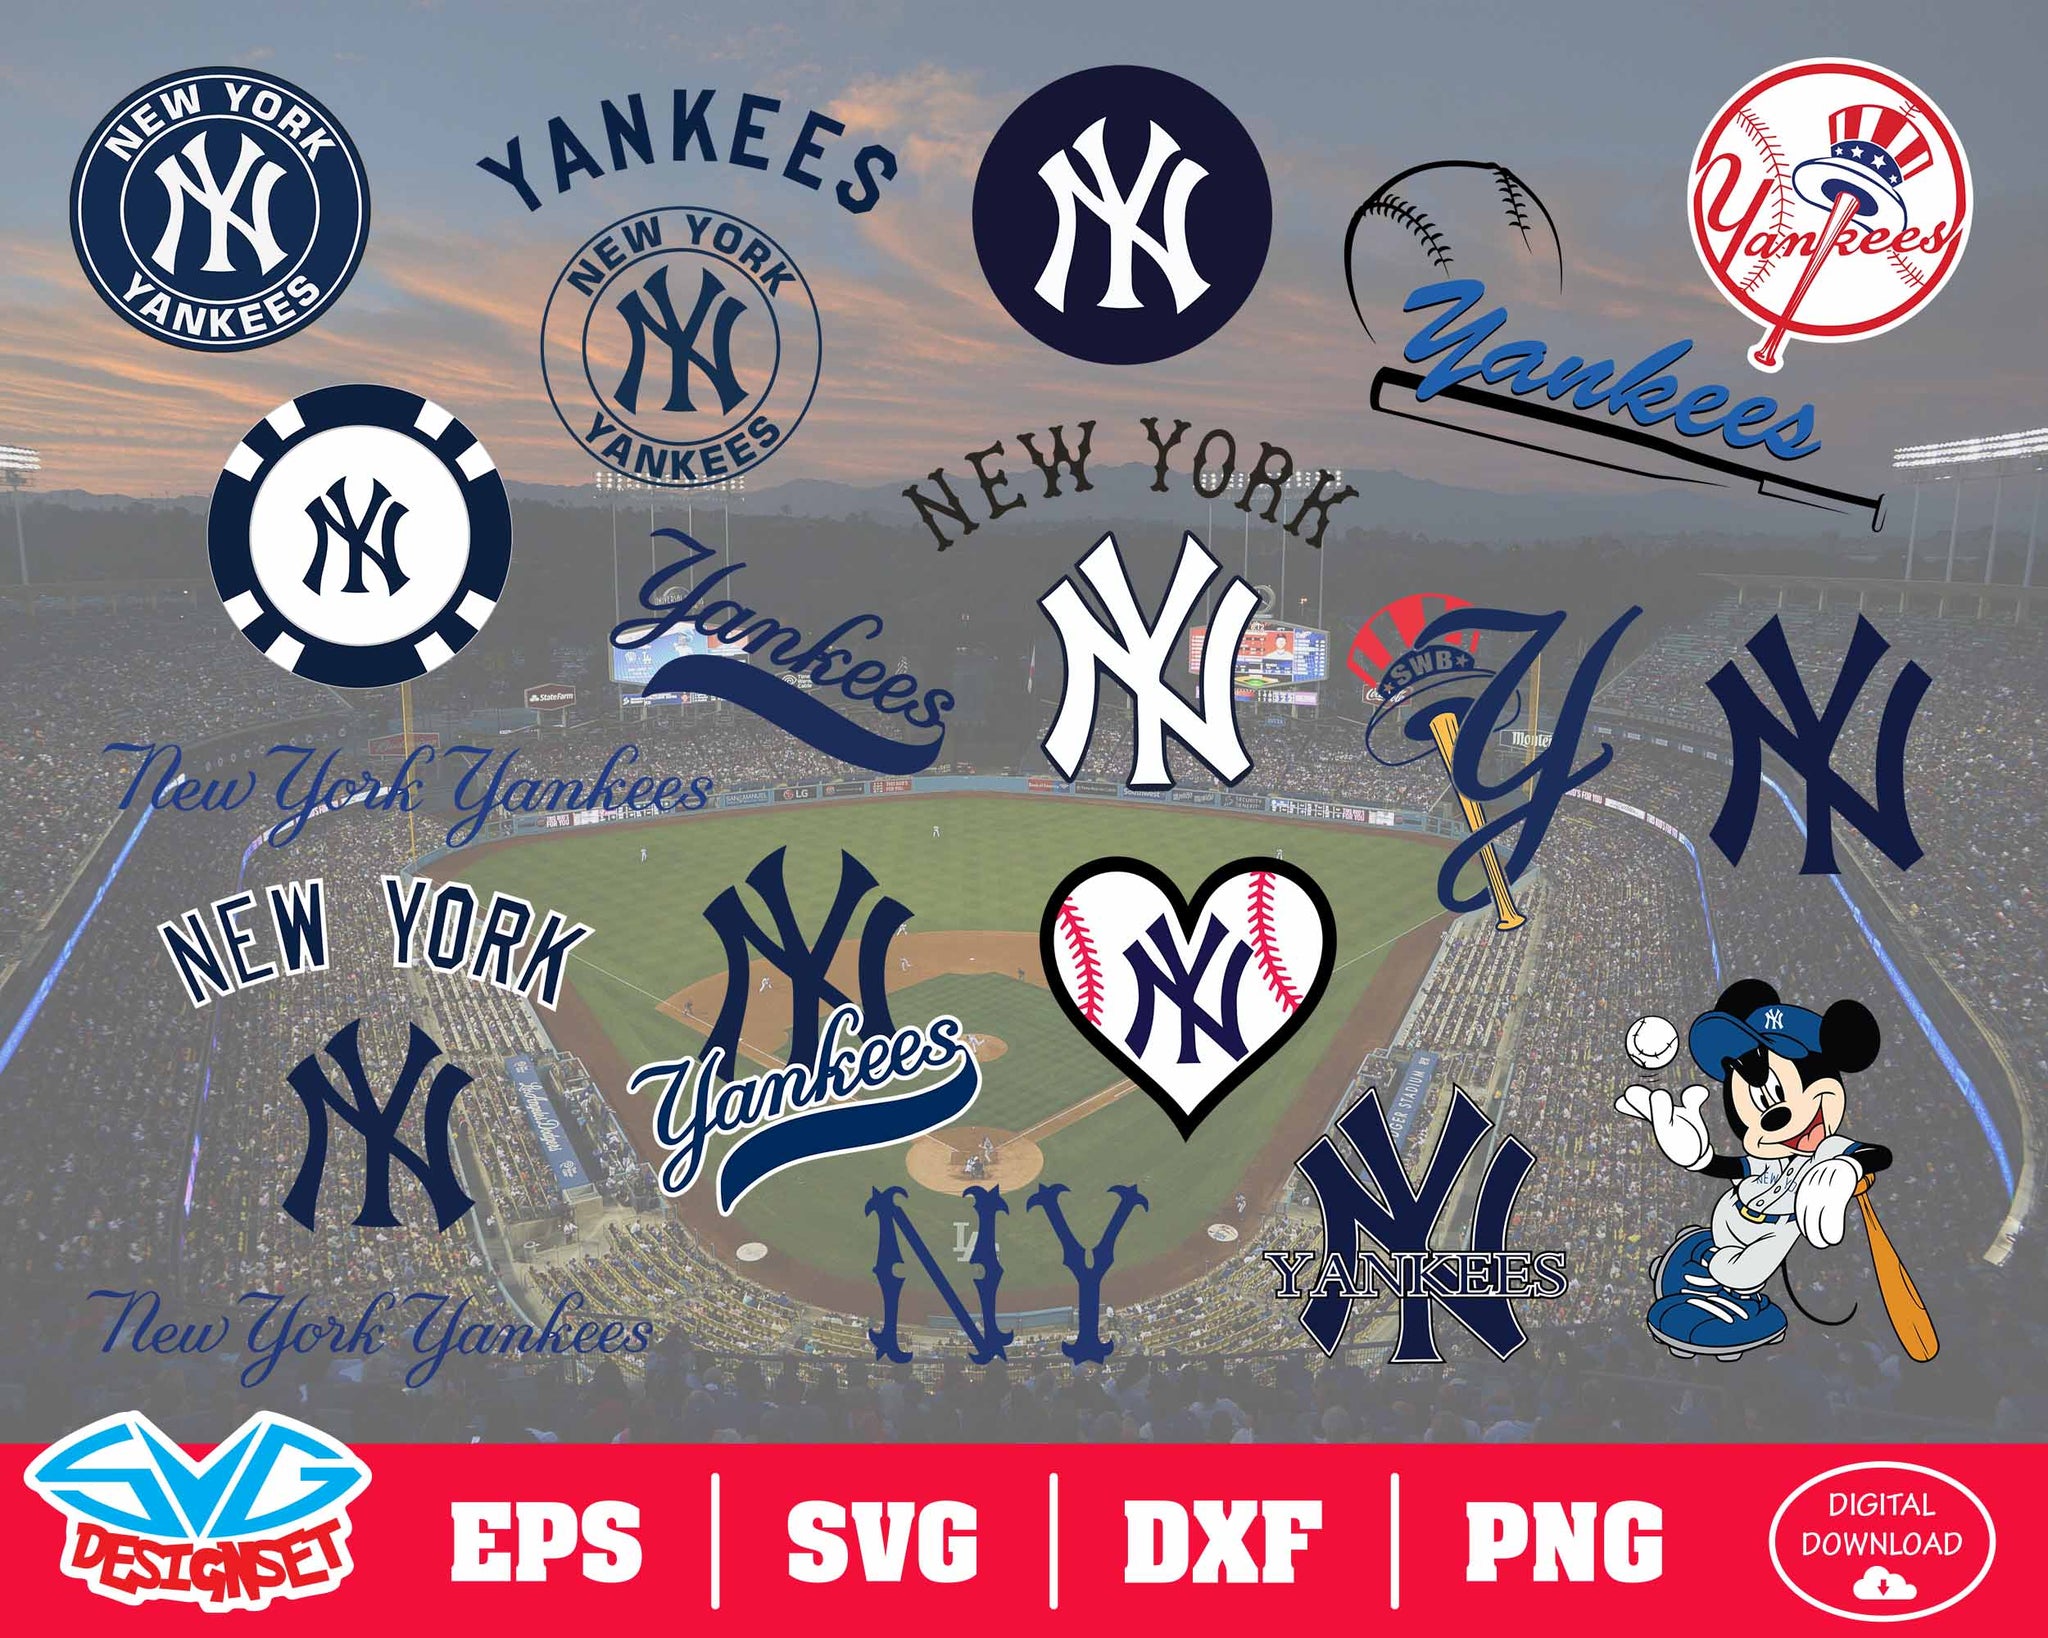 New York Yankees Team Svg, Dxf, Eps, Png, Clipart, Silhouette and Cutfiles - SVGDesignSets